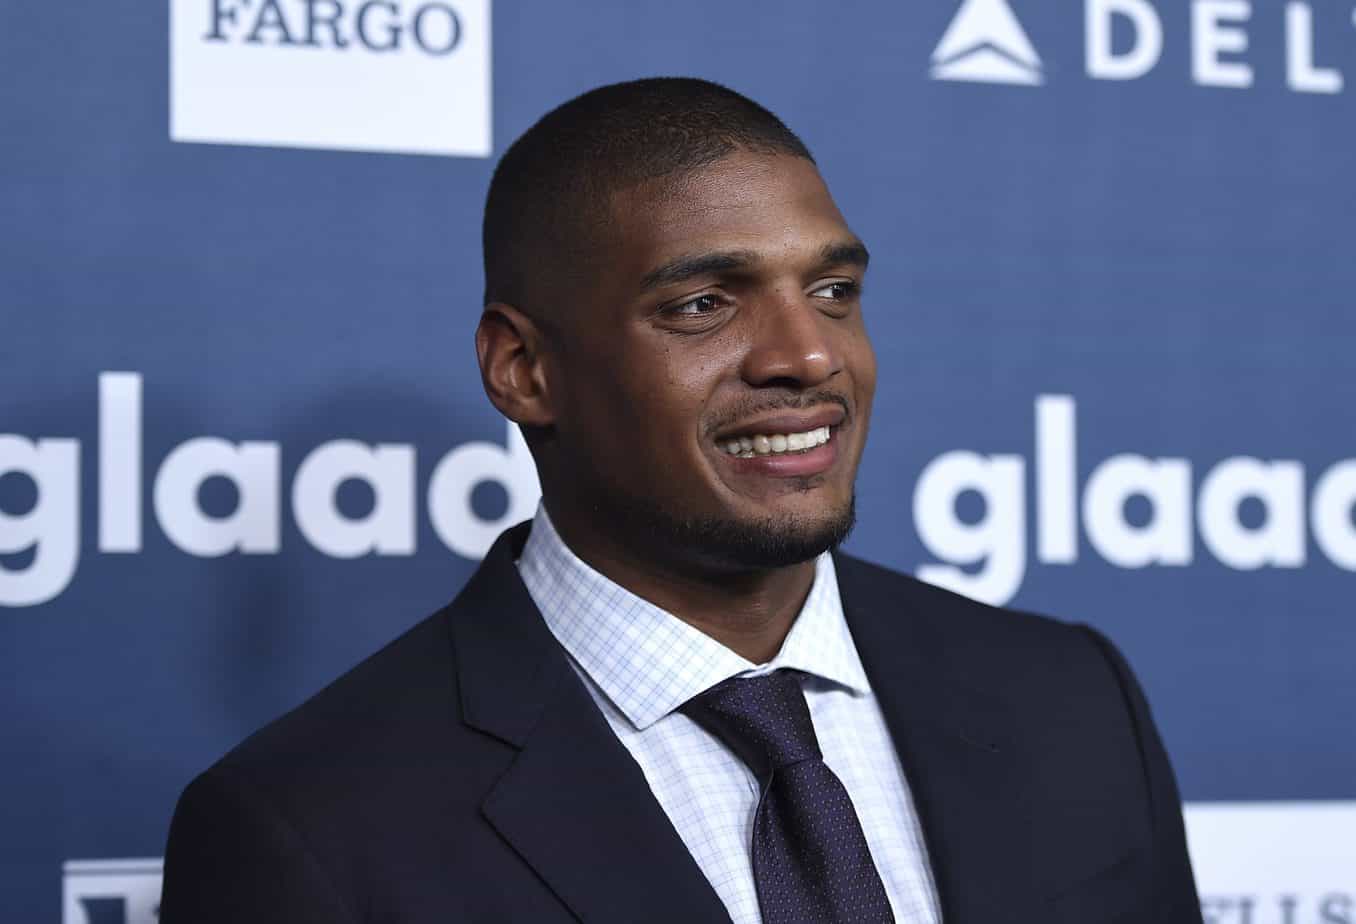 Michael Sam opens up on the Jon Gruden homophobic email leak which referenced him being drafted by the Rams back in the day